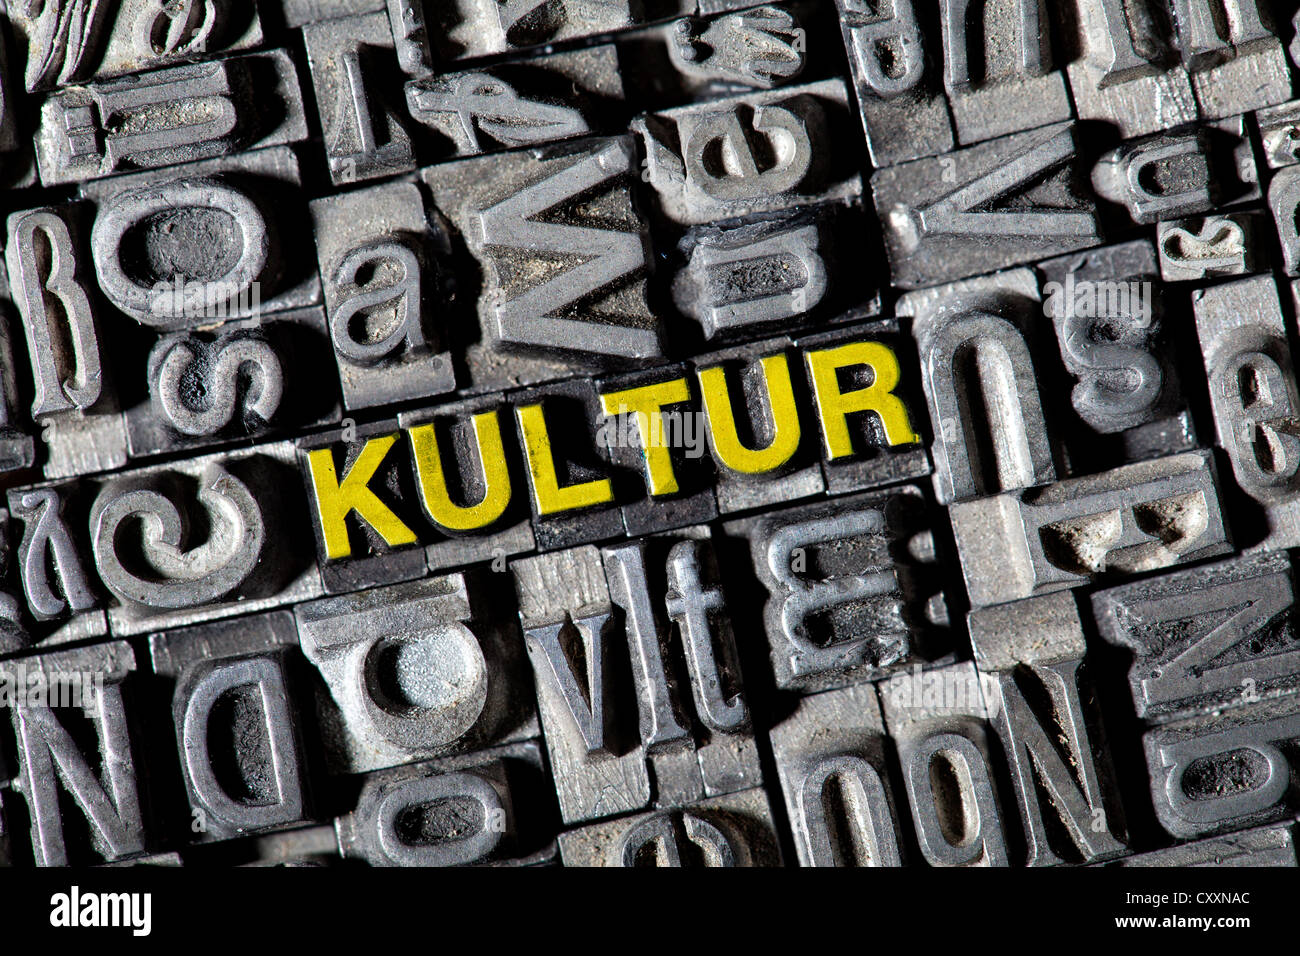 Old lead letters, lettering 'KULTUR', German for 'culture' Stock Photo